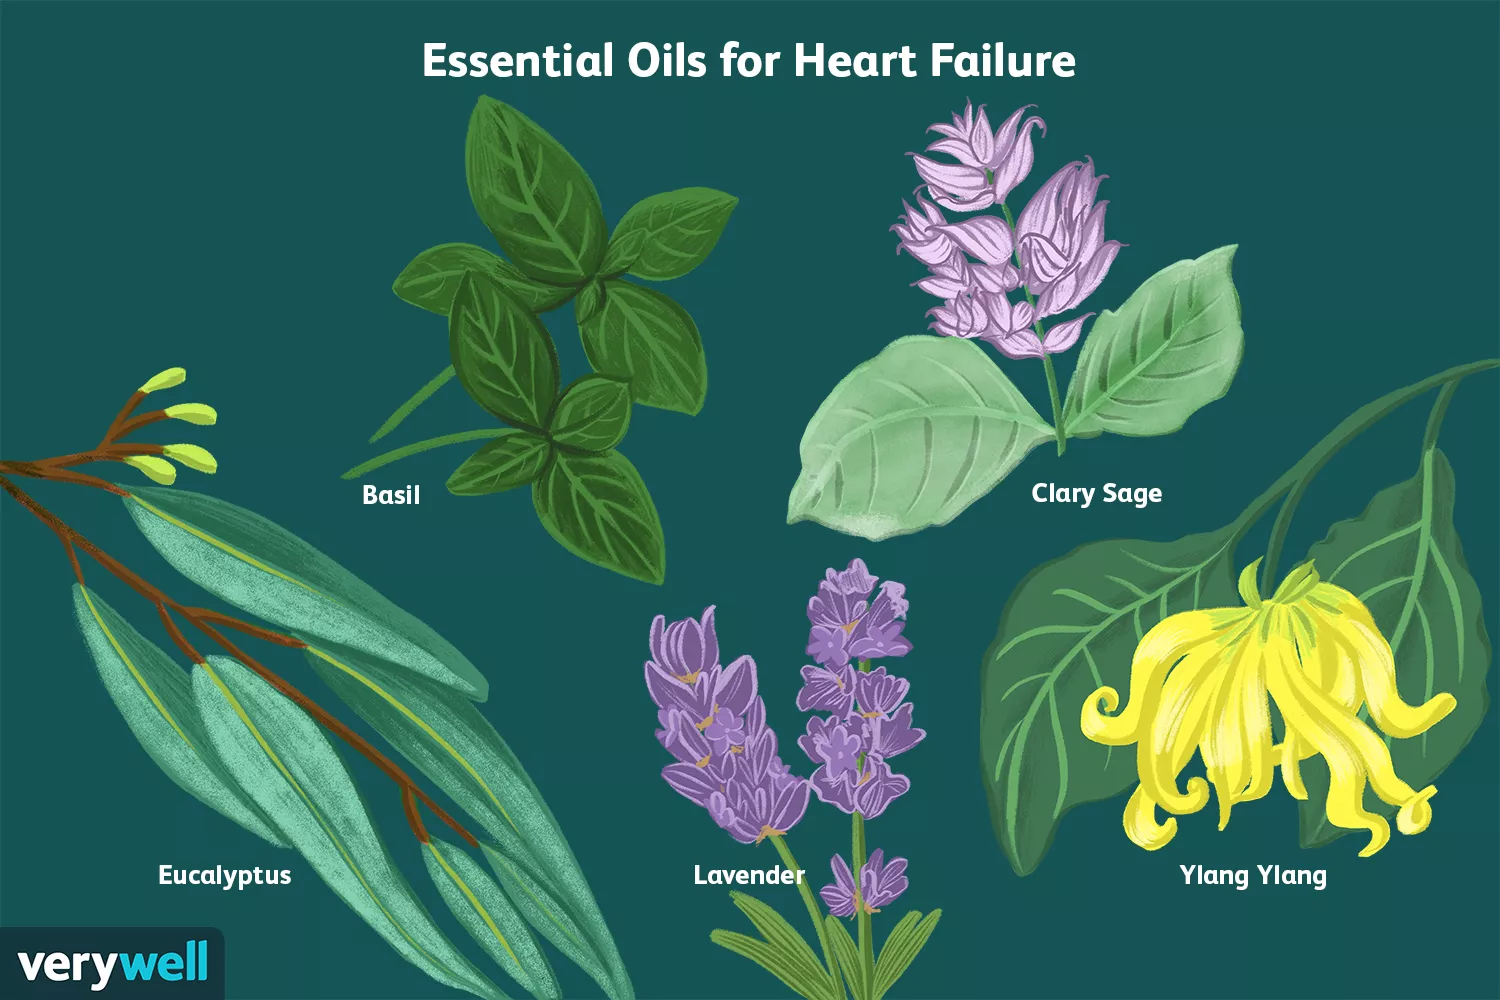 The Health Benefits of Essential Oils for Congestive Heart Failure